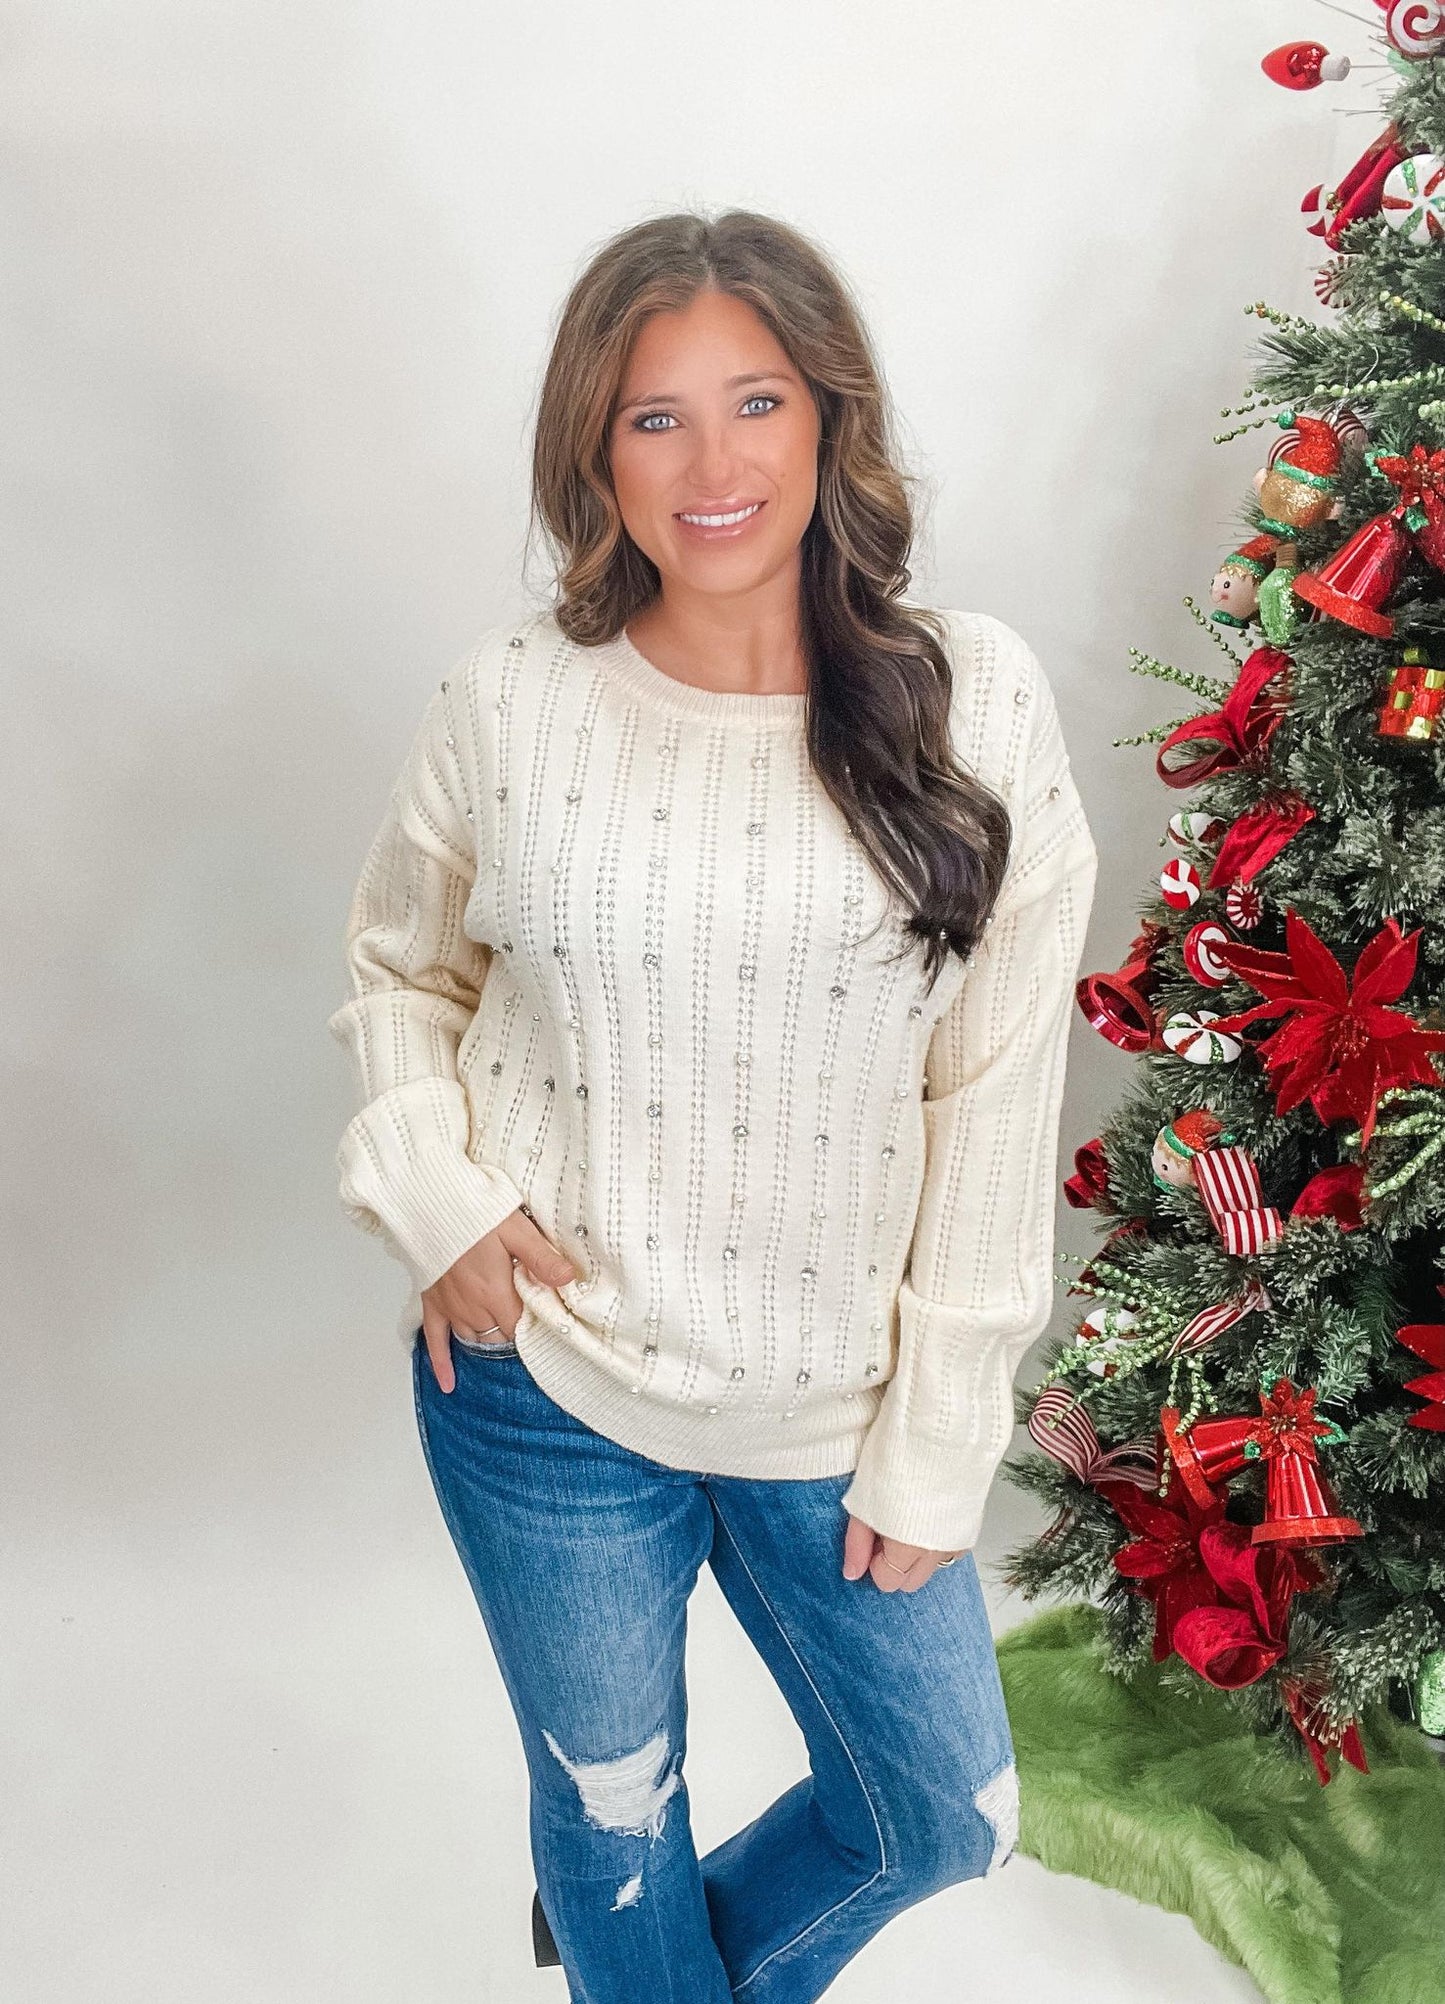 Tell Me A Lie Sweater - Ivory (was $46.90)